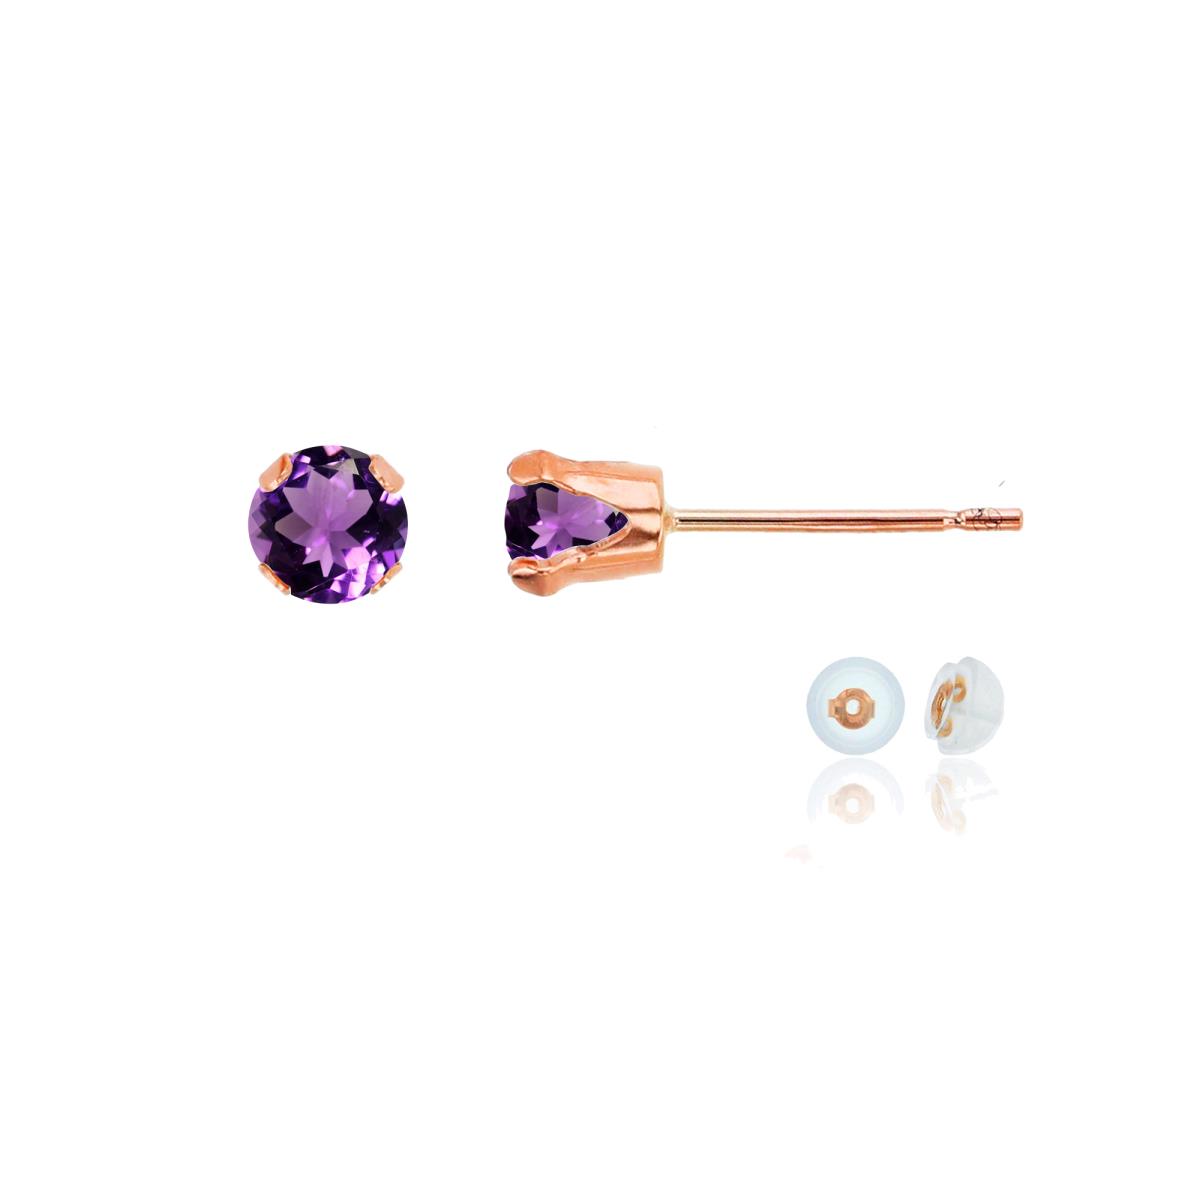 10K Rose Gold 4mm Round Amethyst Stud Earring with Silicone Back